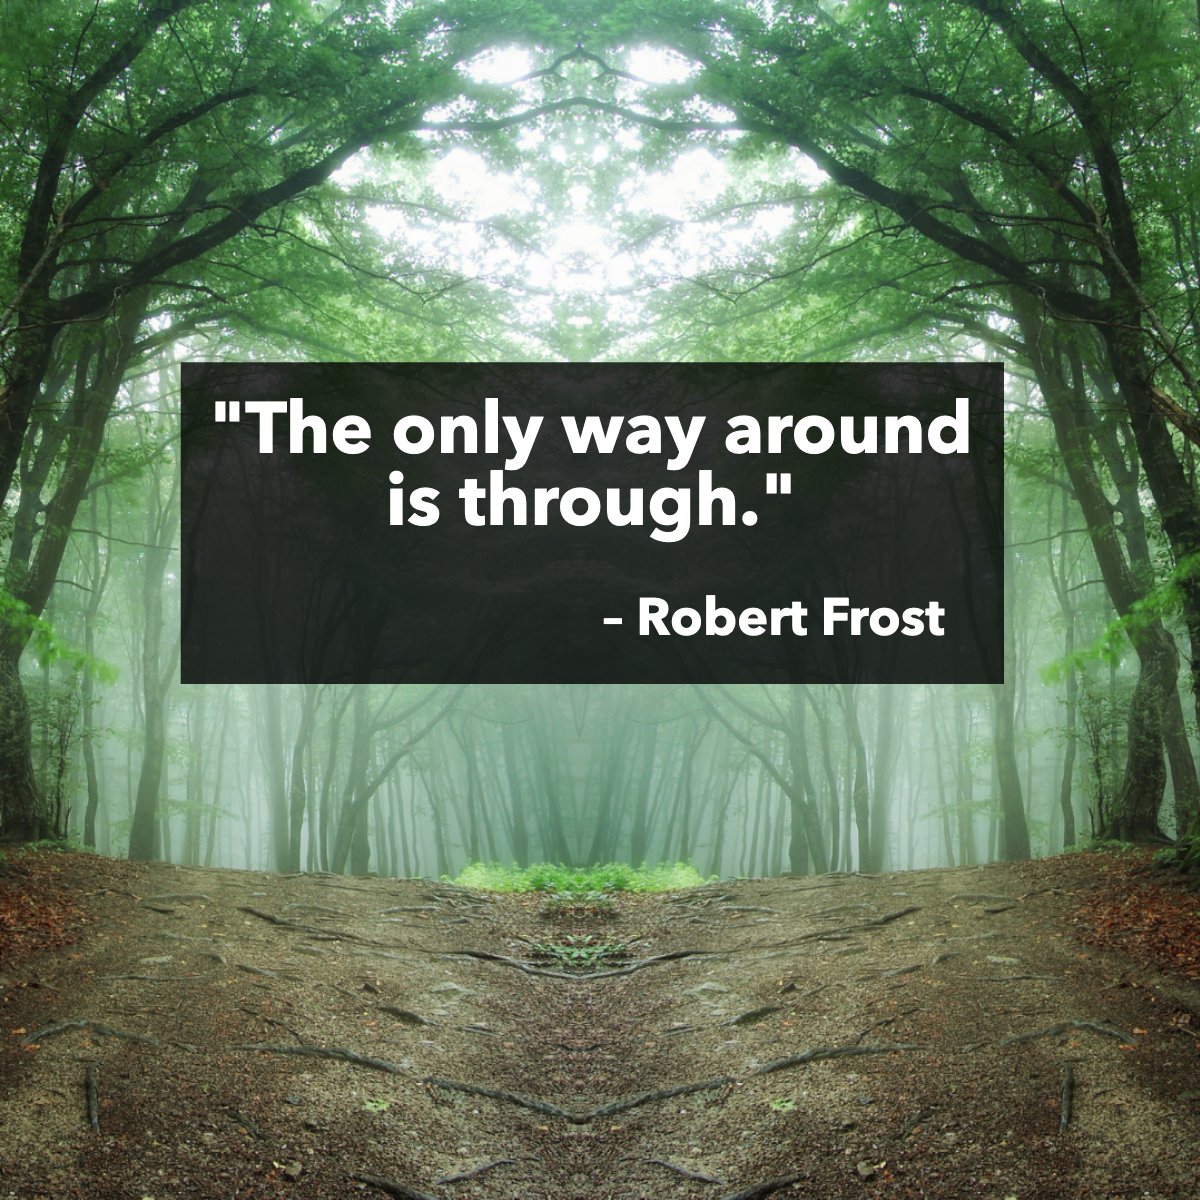 'The only way around is through.' 👌
– Robert Frost

What obstacles are you conquering today 

#challenges #inspriring #inspirational #woods #forest #robertfrost #quote
#Social #Realtor #Posts #calcoastagent #centralcoast #centralcoastrealtor #pismobeachrealtor